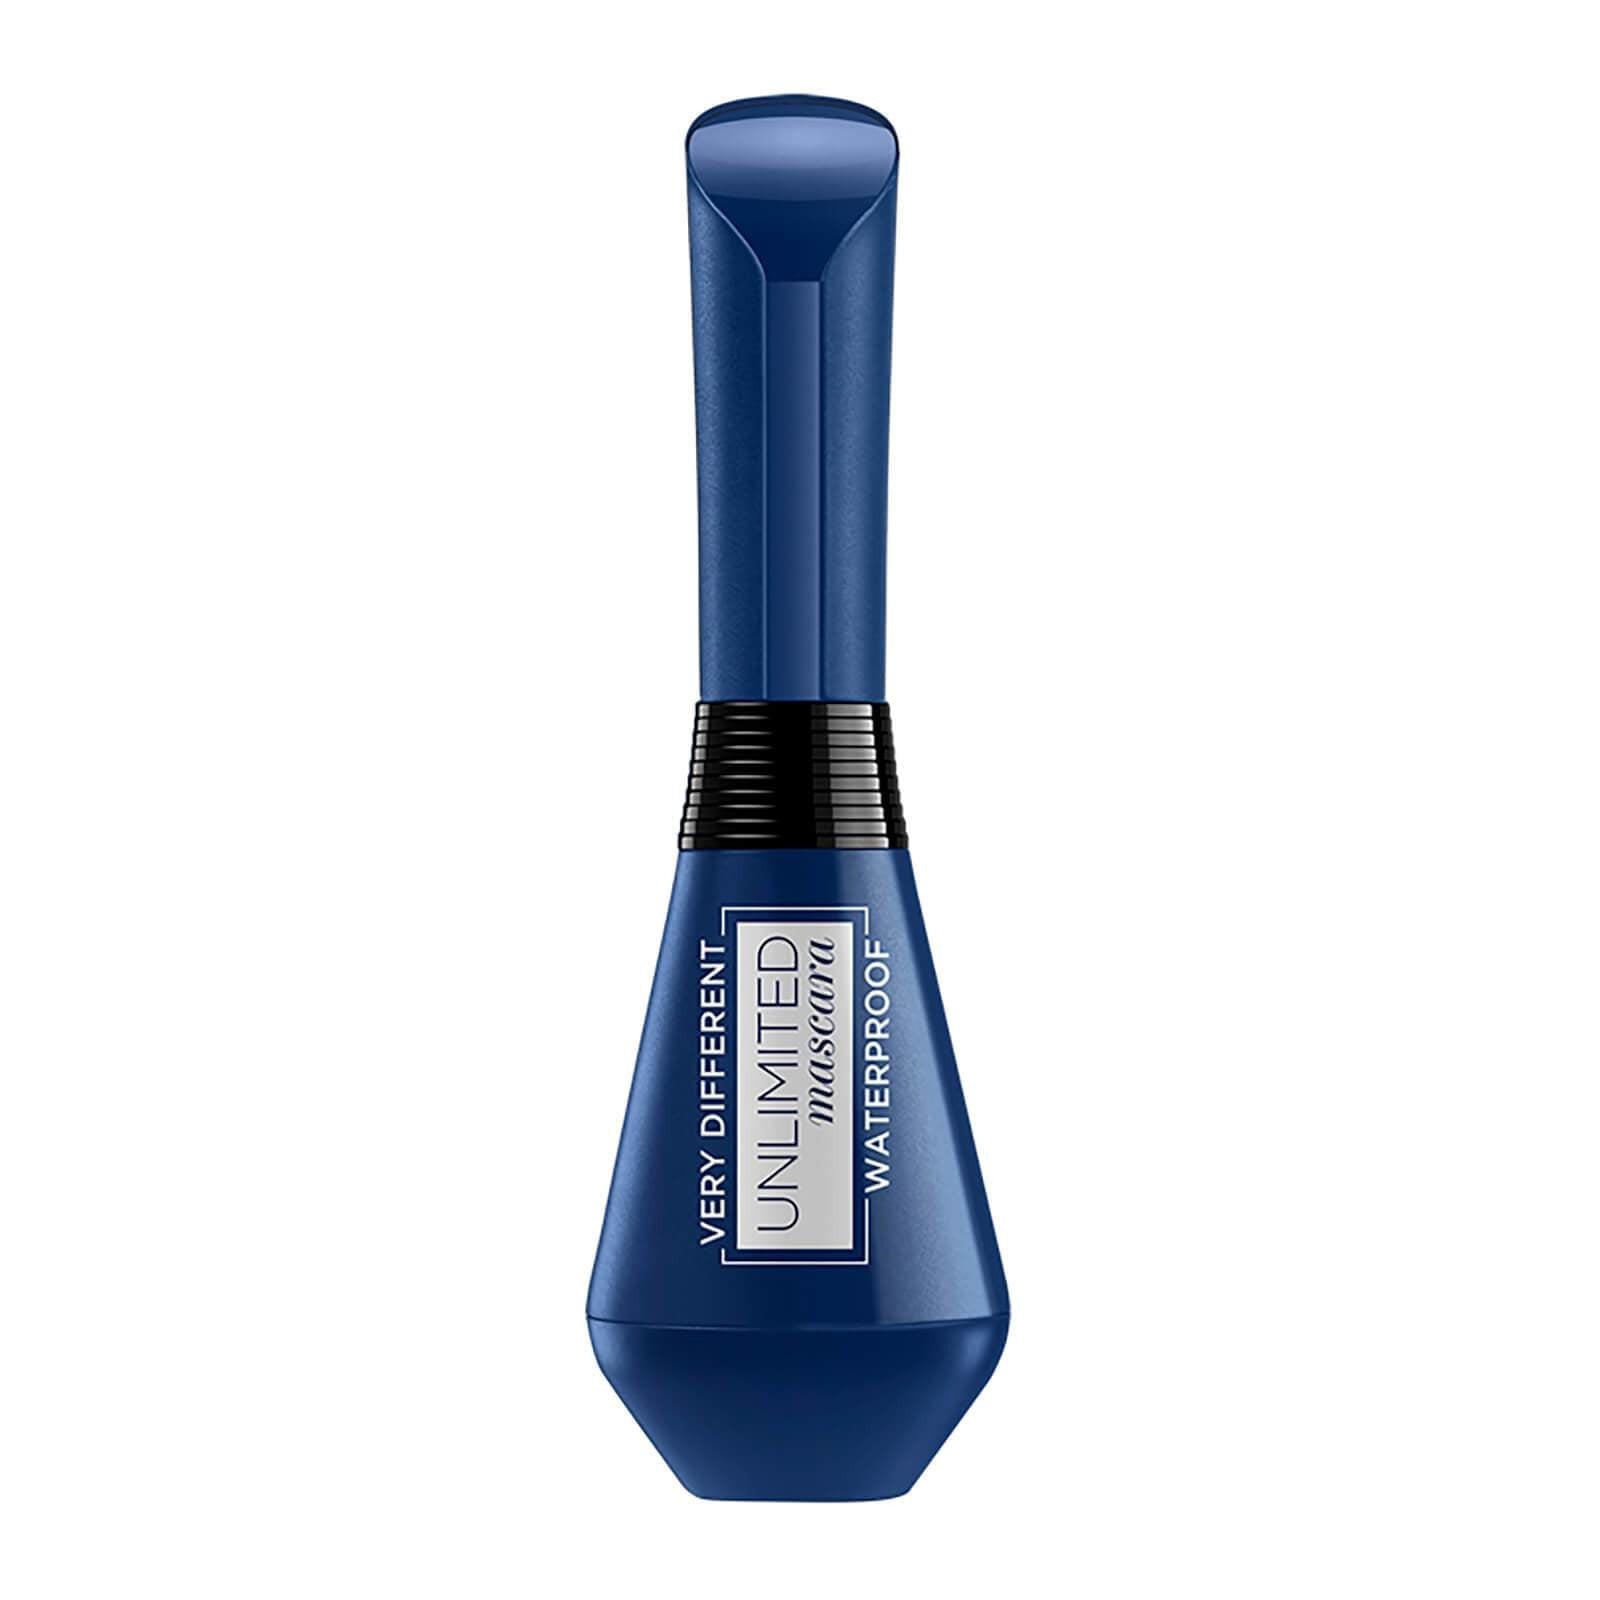 Loreal Very Different Unlimited Waterproof Mascara Black